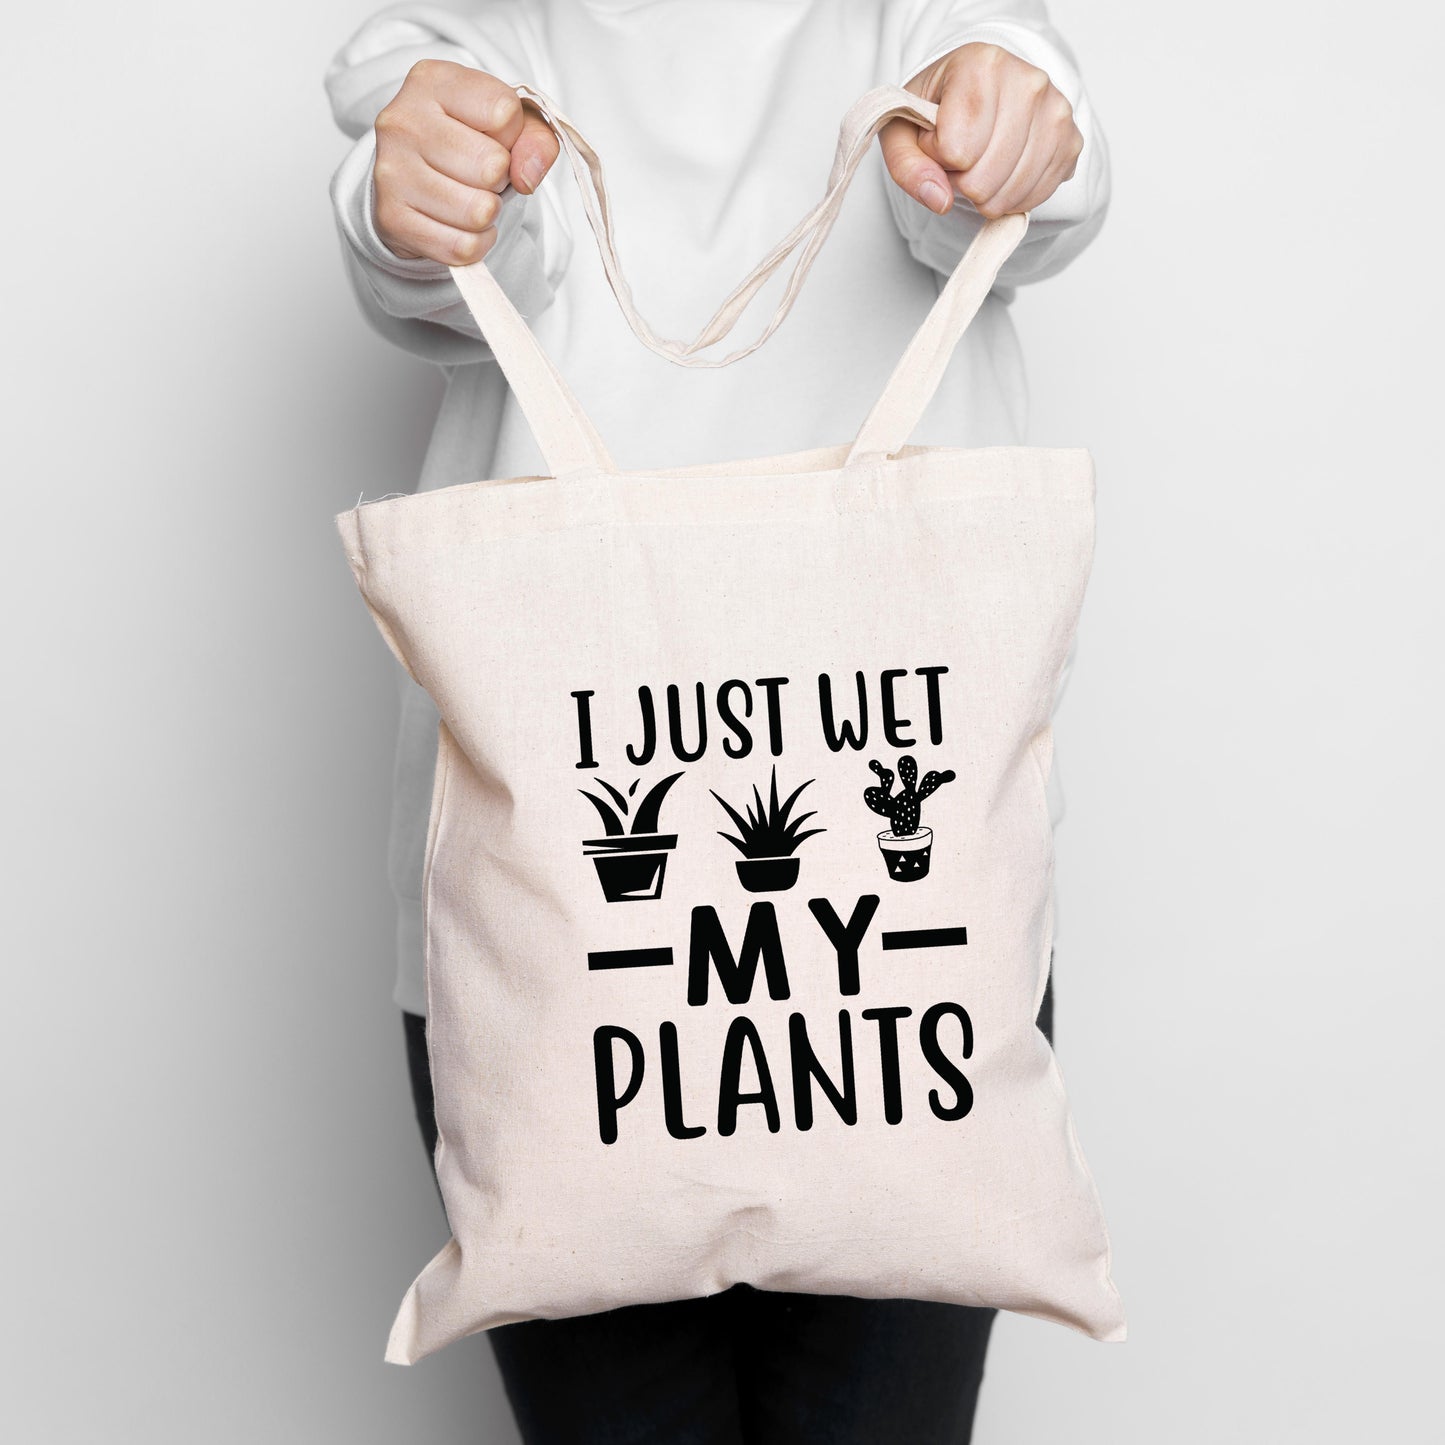 Funny Tote 'I just wet my plants'